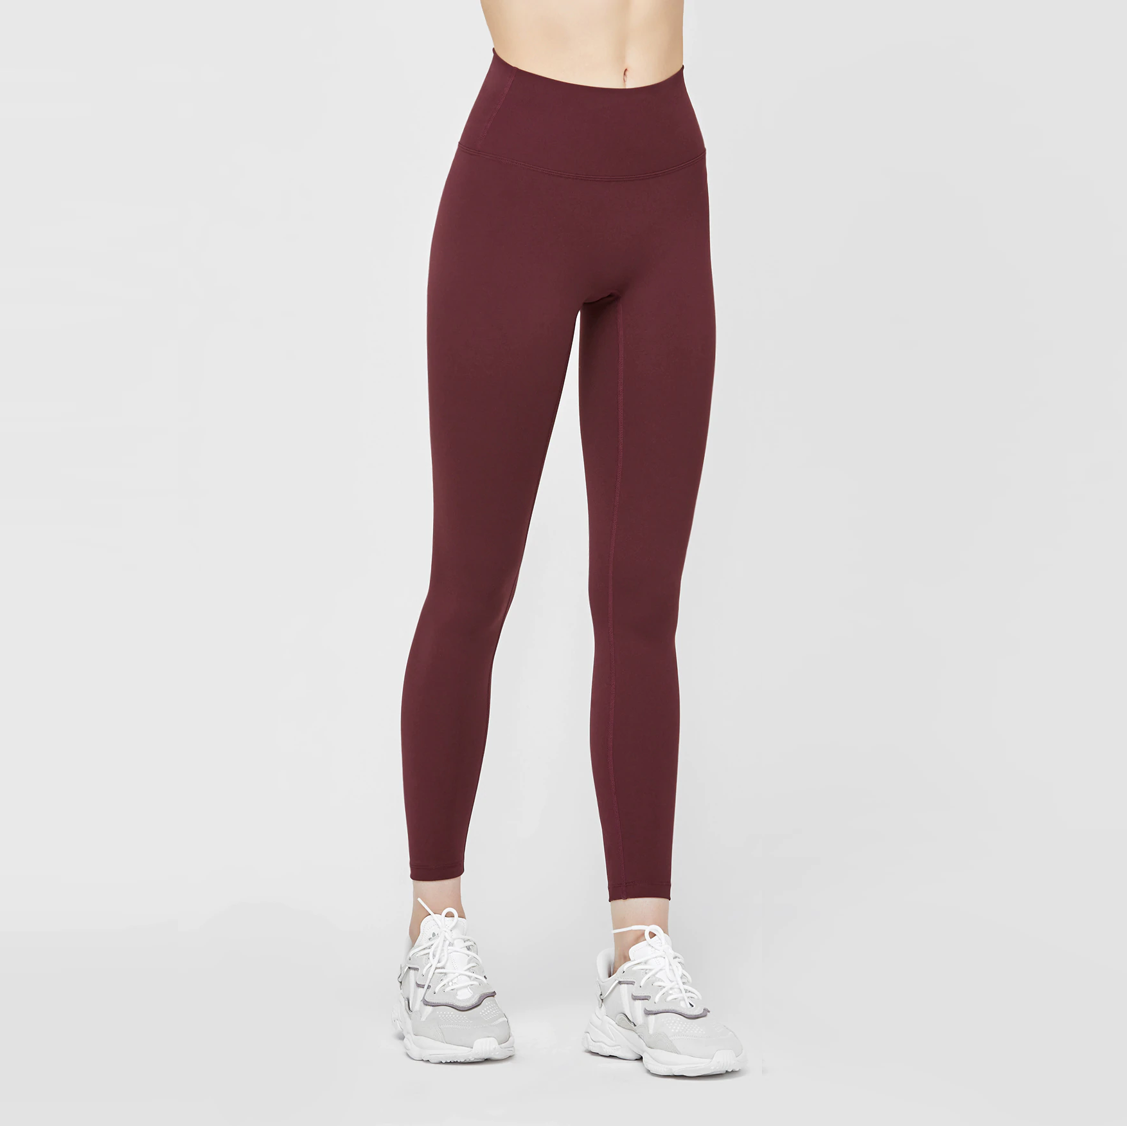 Up-Down Daily Leggings - Truffle